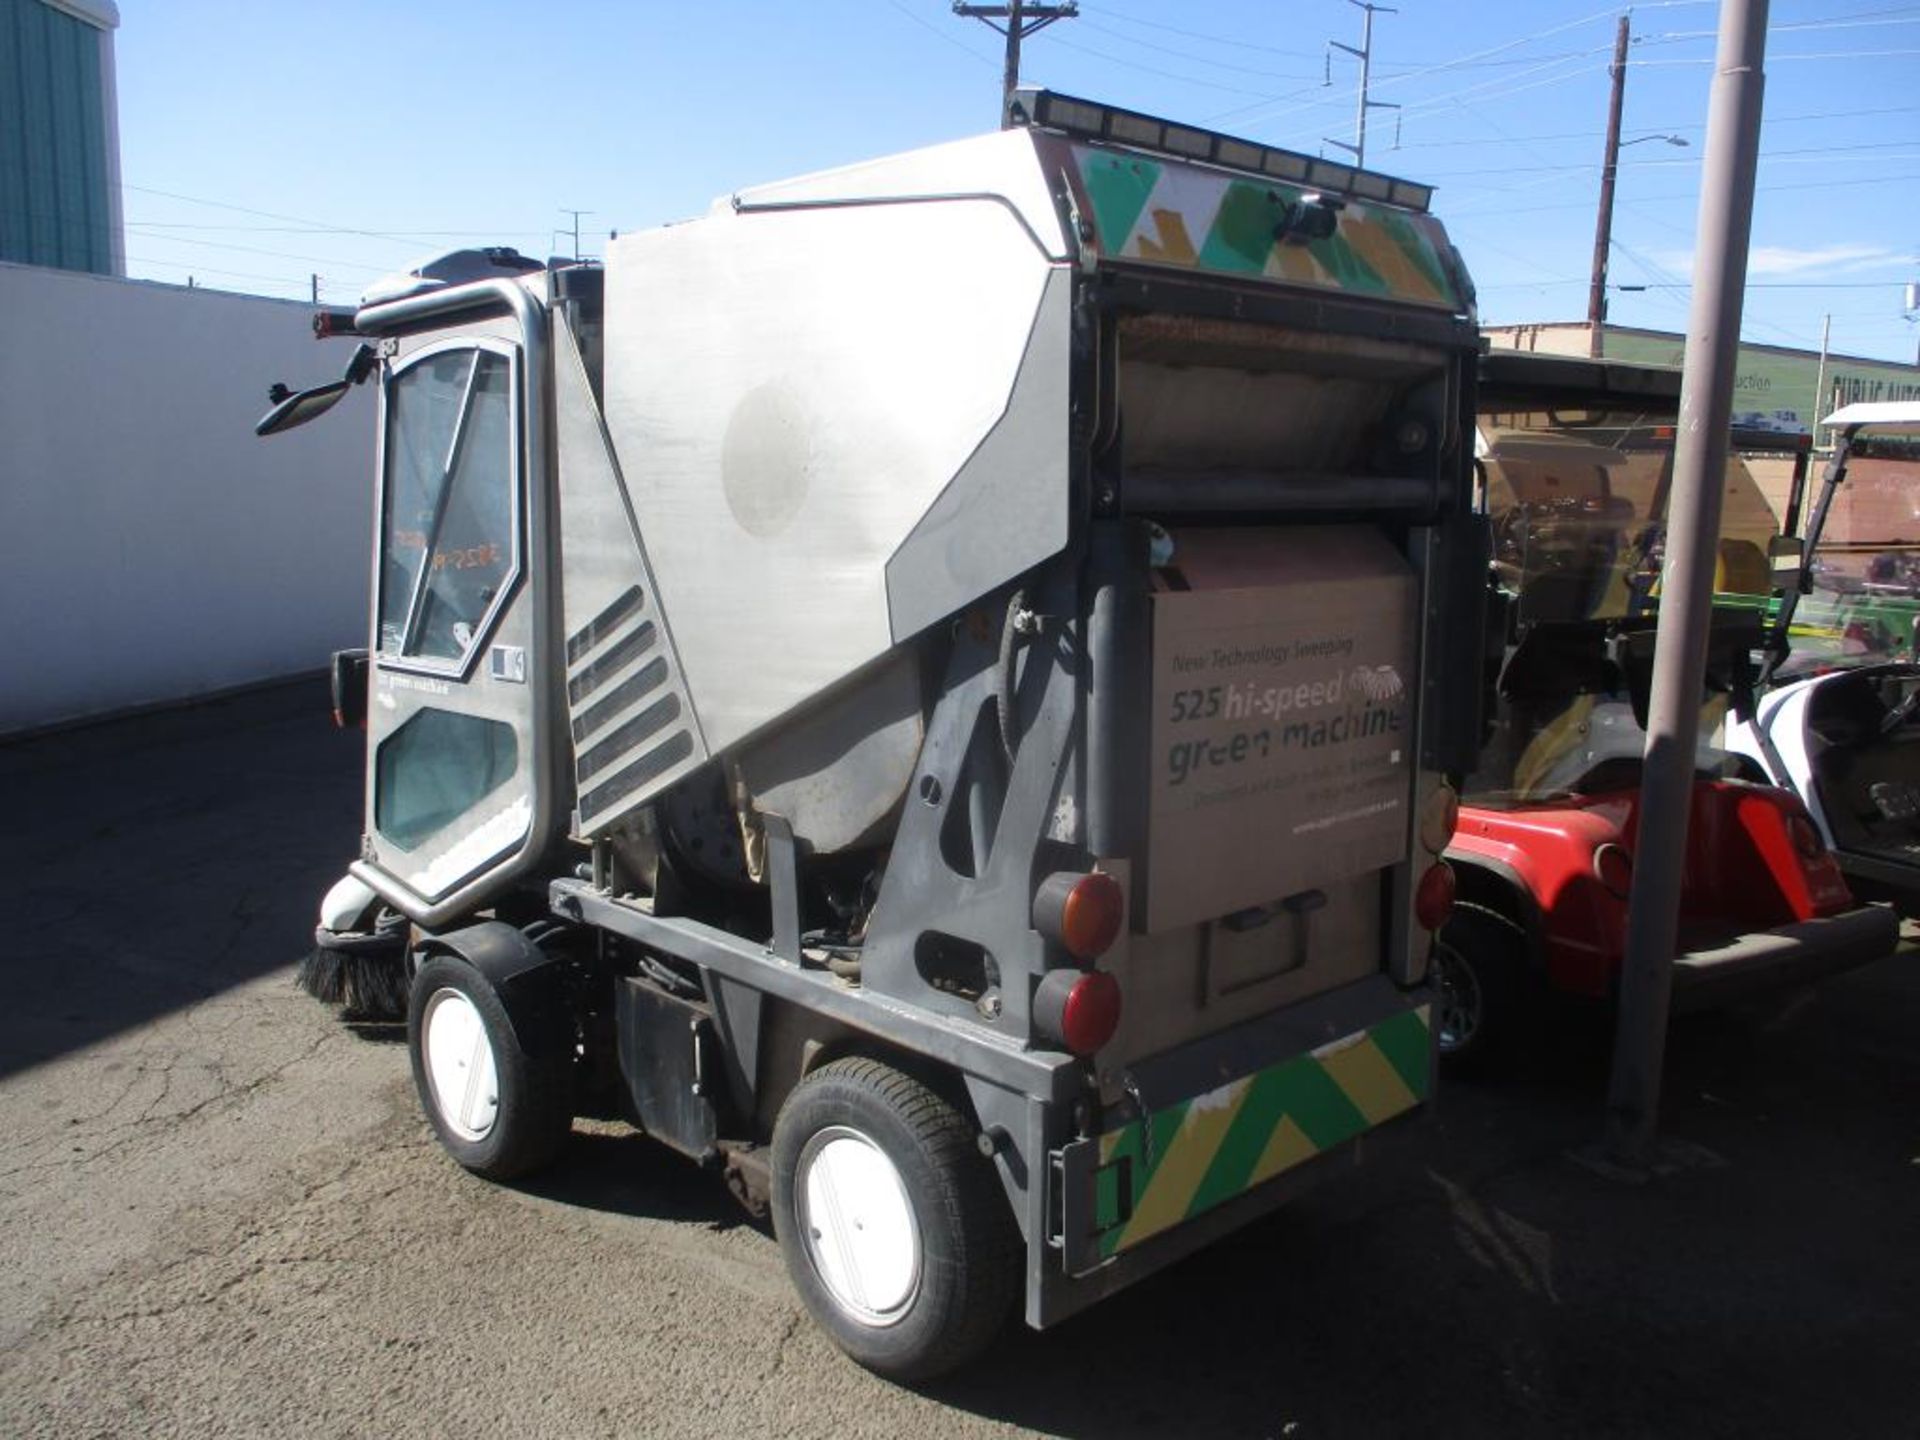 (Lot # 3925a) - Tennant 525 Green Machine Sweeper - Image 2 of 9